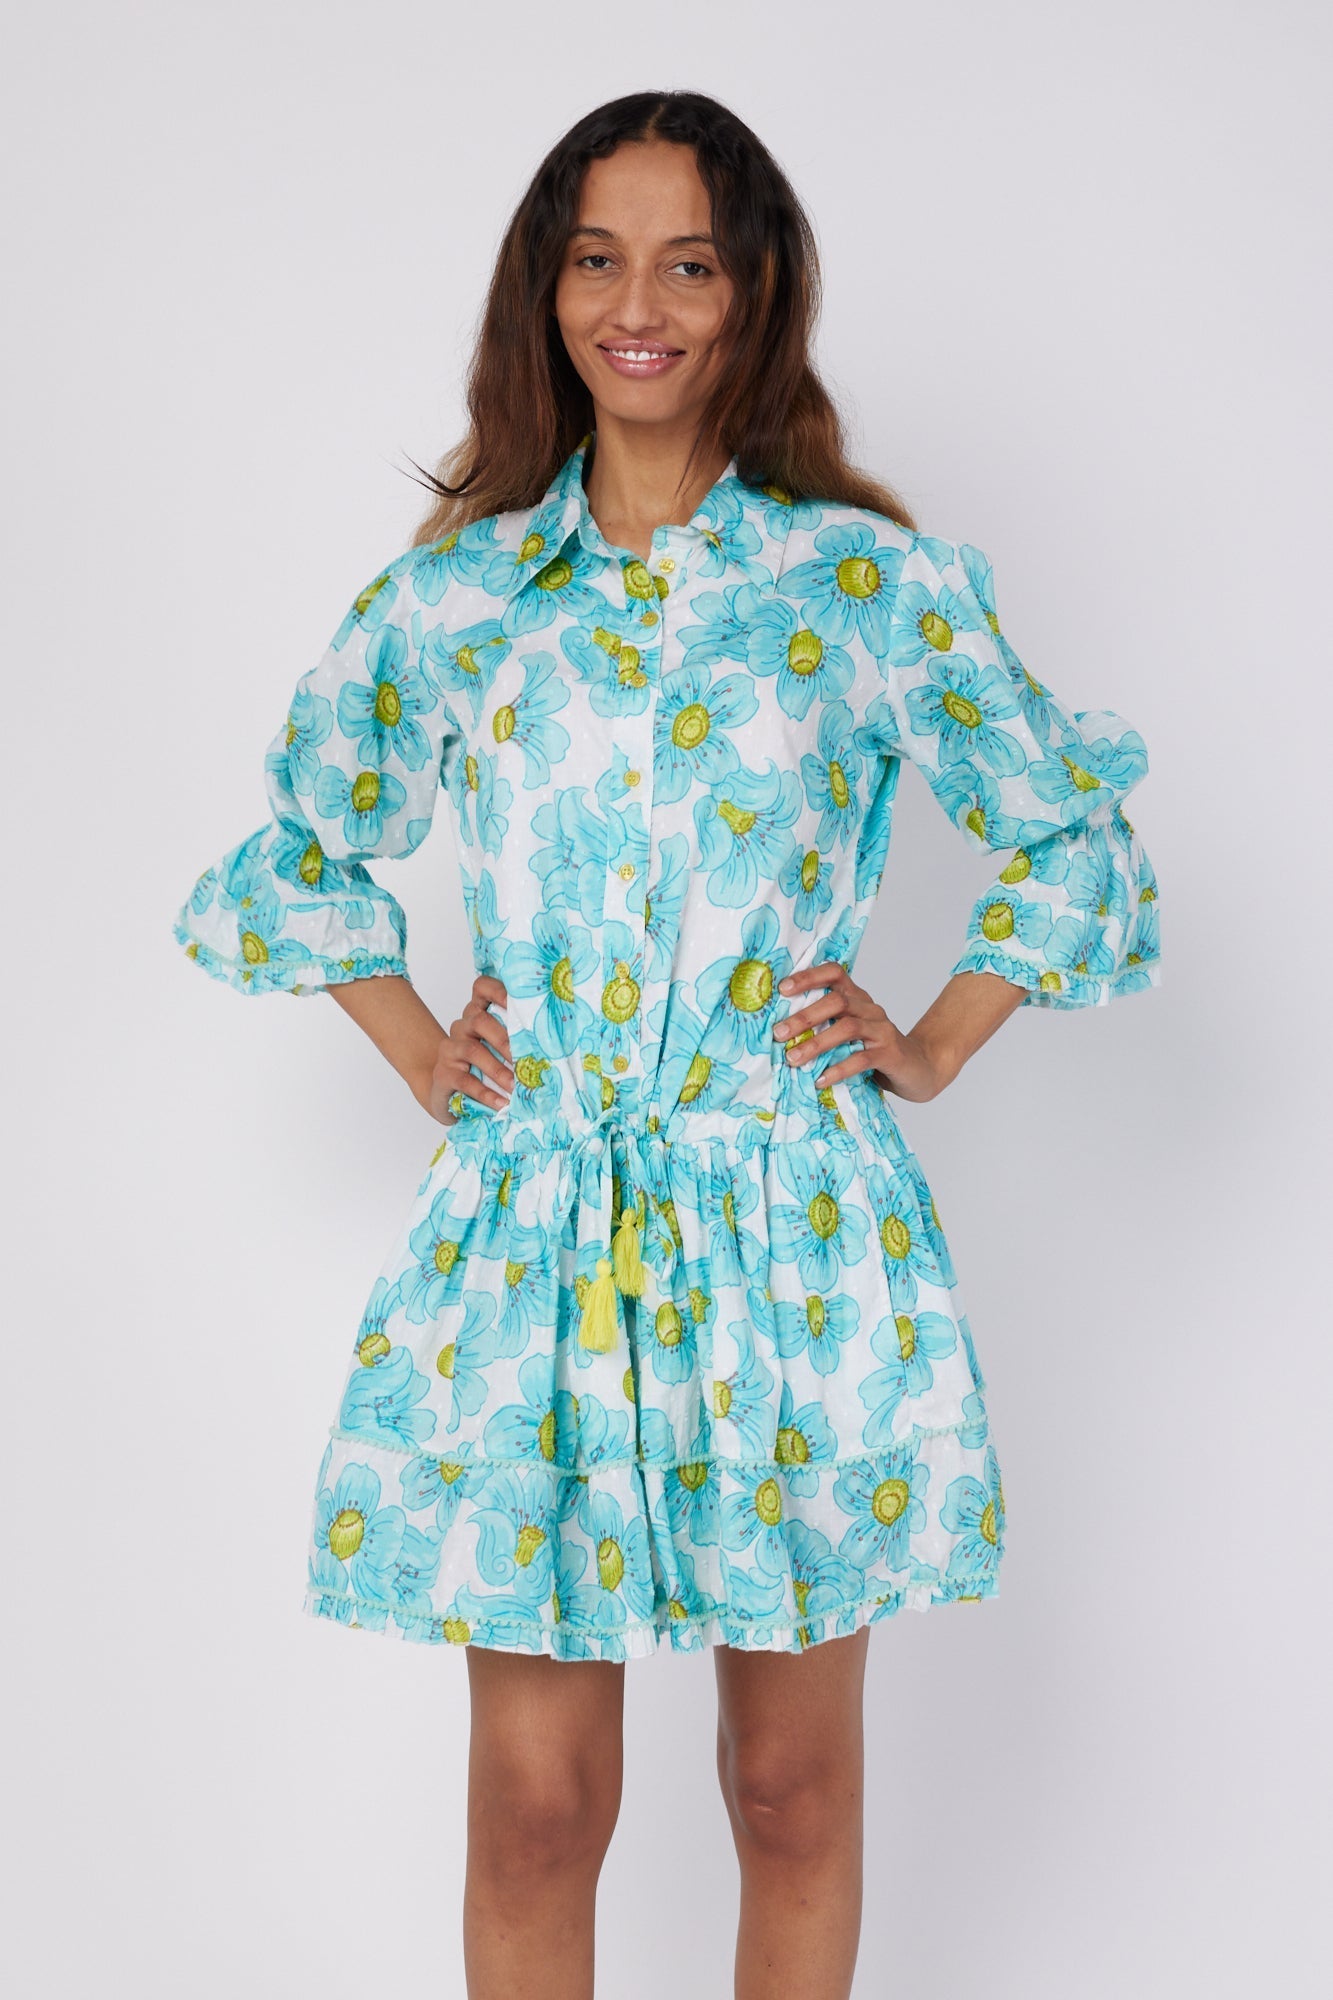 ModaPosa Penelope 3/4 Frill Puff Sleeve Drop Waist Mini Dress with Pockets in Blue Floral . Discover women's resort dresses and lifestyle clothing inspired by the Mediterranean. Free worldwide shipping available!